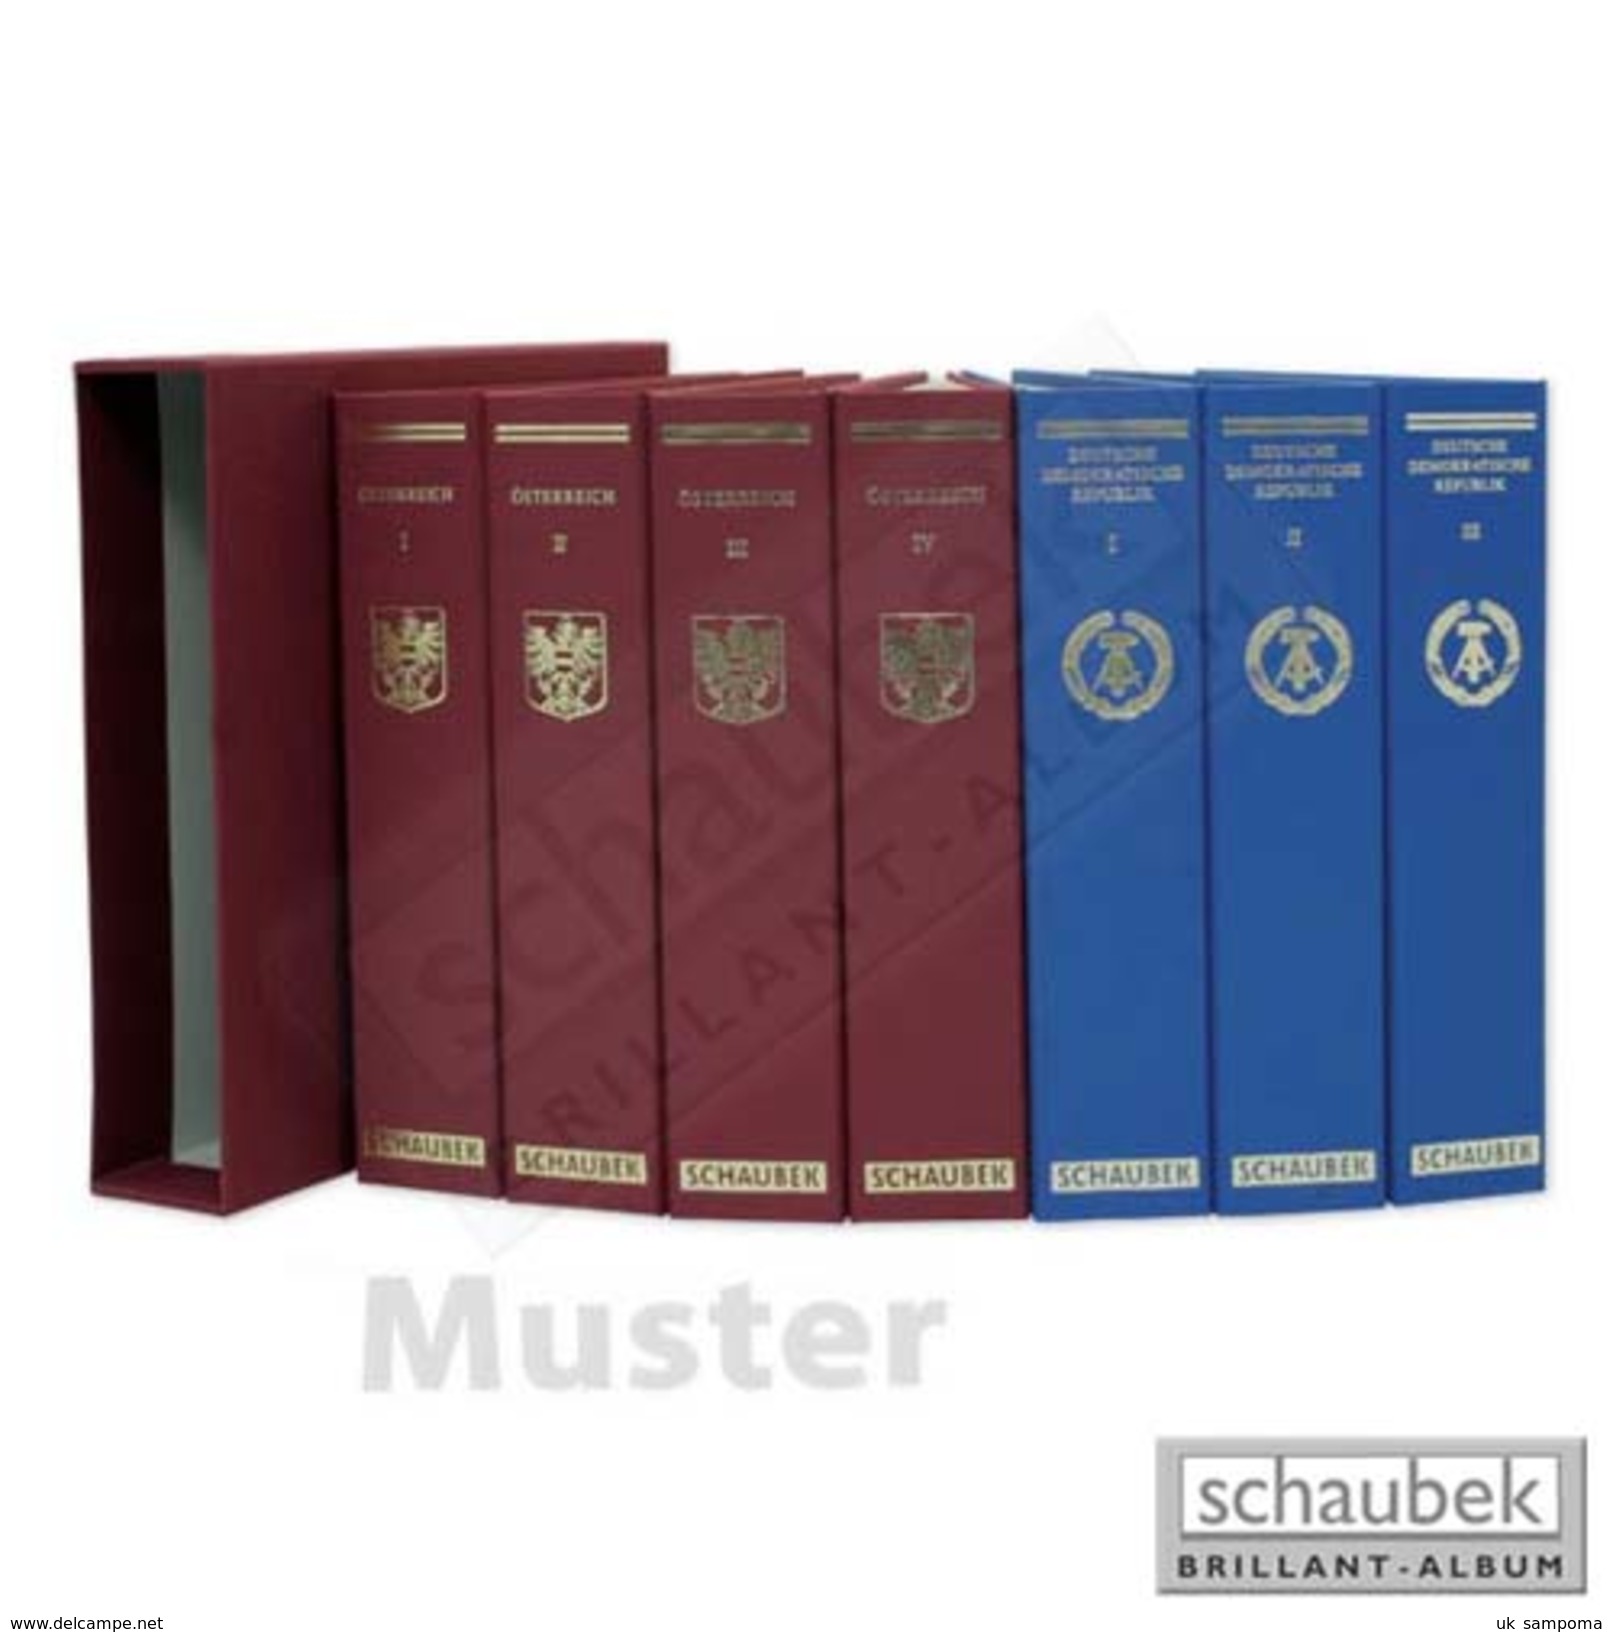 Schaubek A-804/04B Album Netherlands 2002-2009 Brillant, In A Blue Screw Post Binder, Vol. IV, Without Slipcase - Binders With Pages